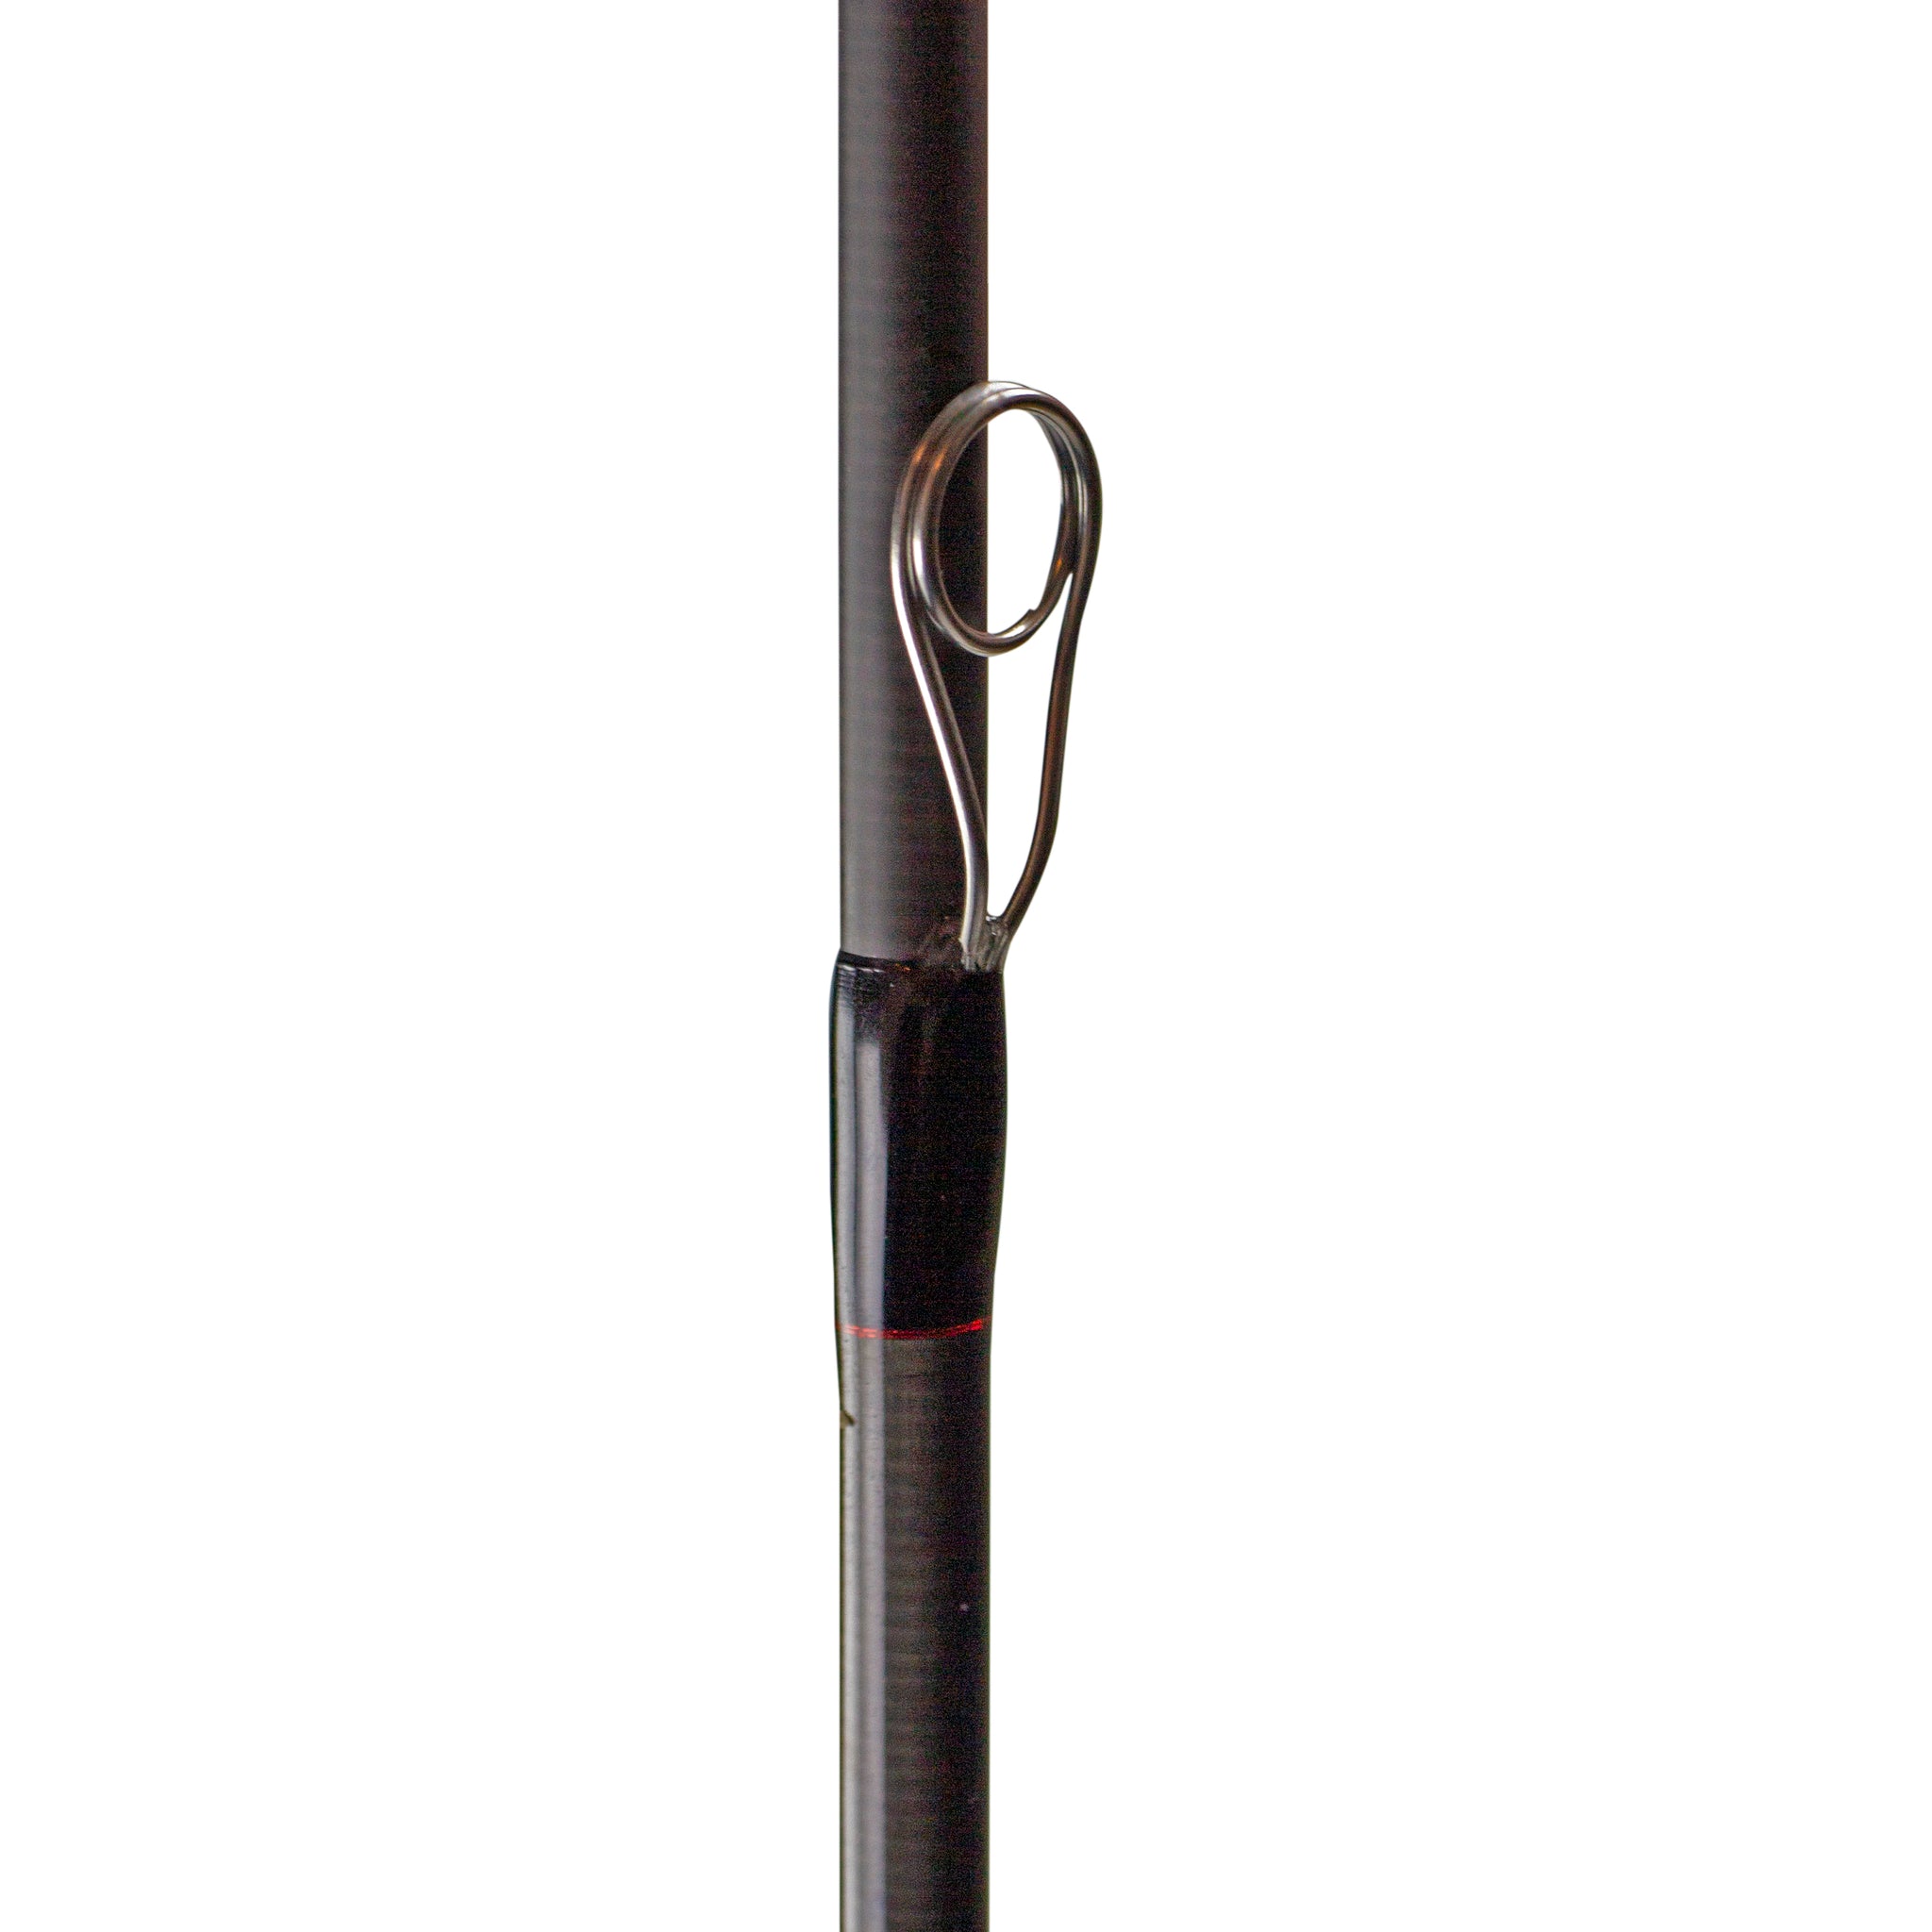 Syndicate P2 1034 10' 3wt Fly Rod - Competitive Angler